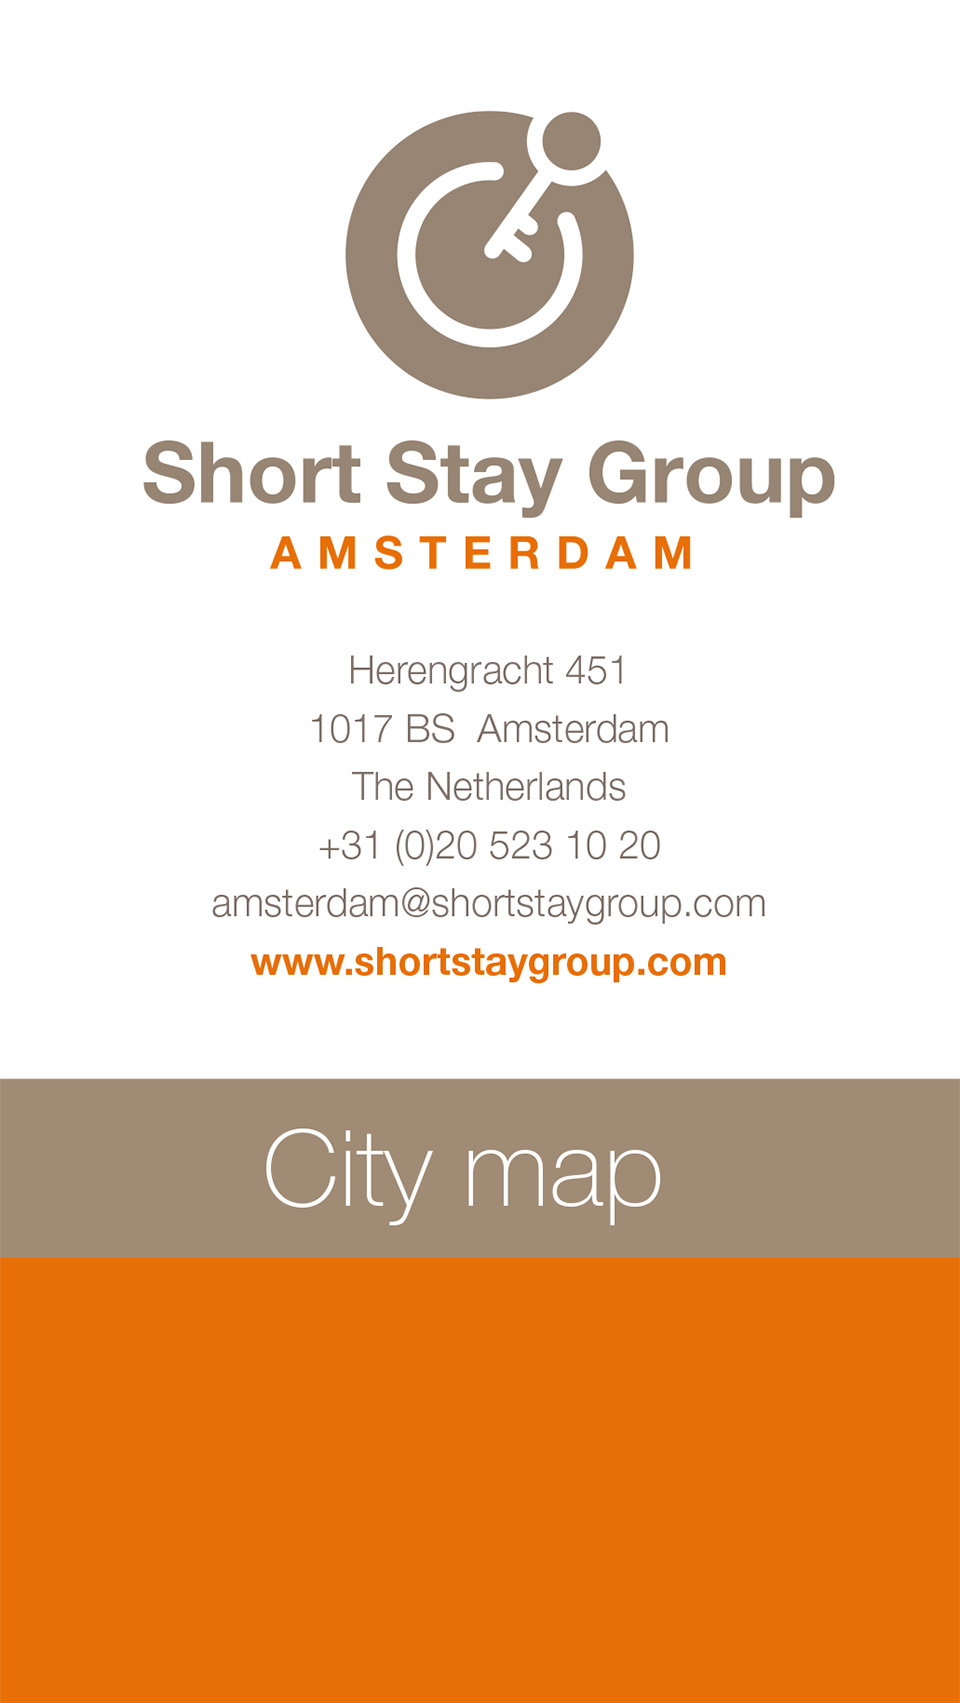 Short Stay Group